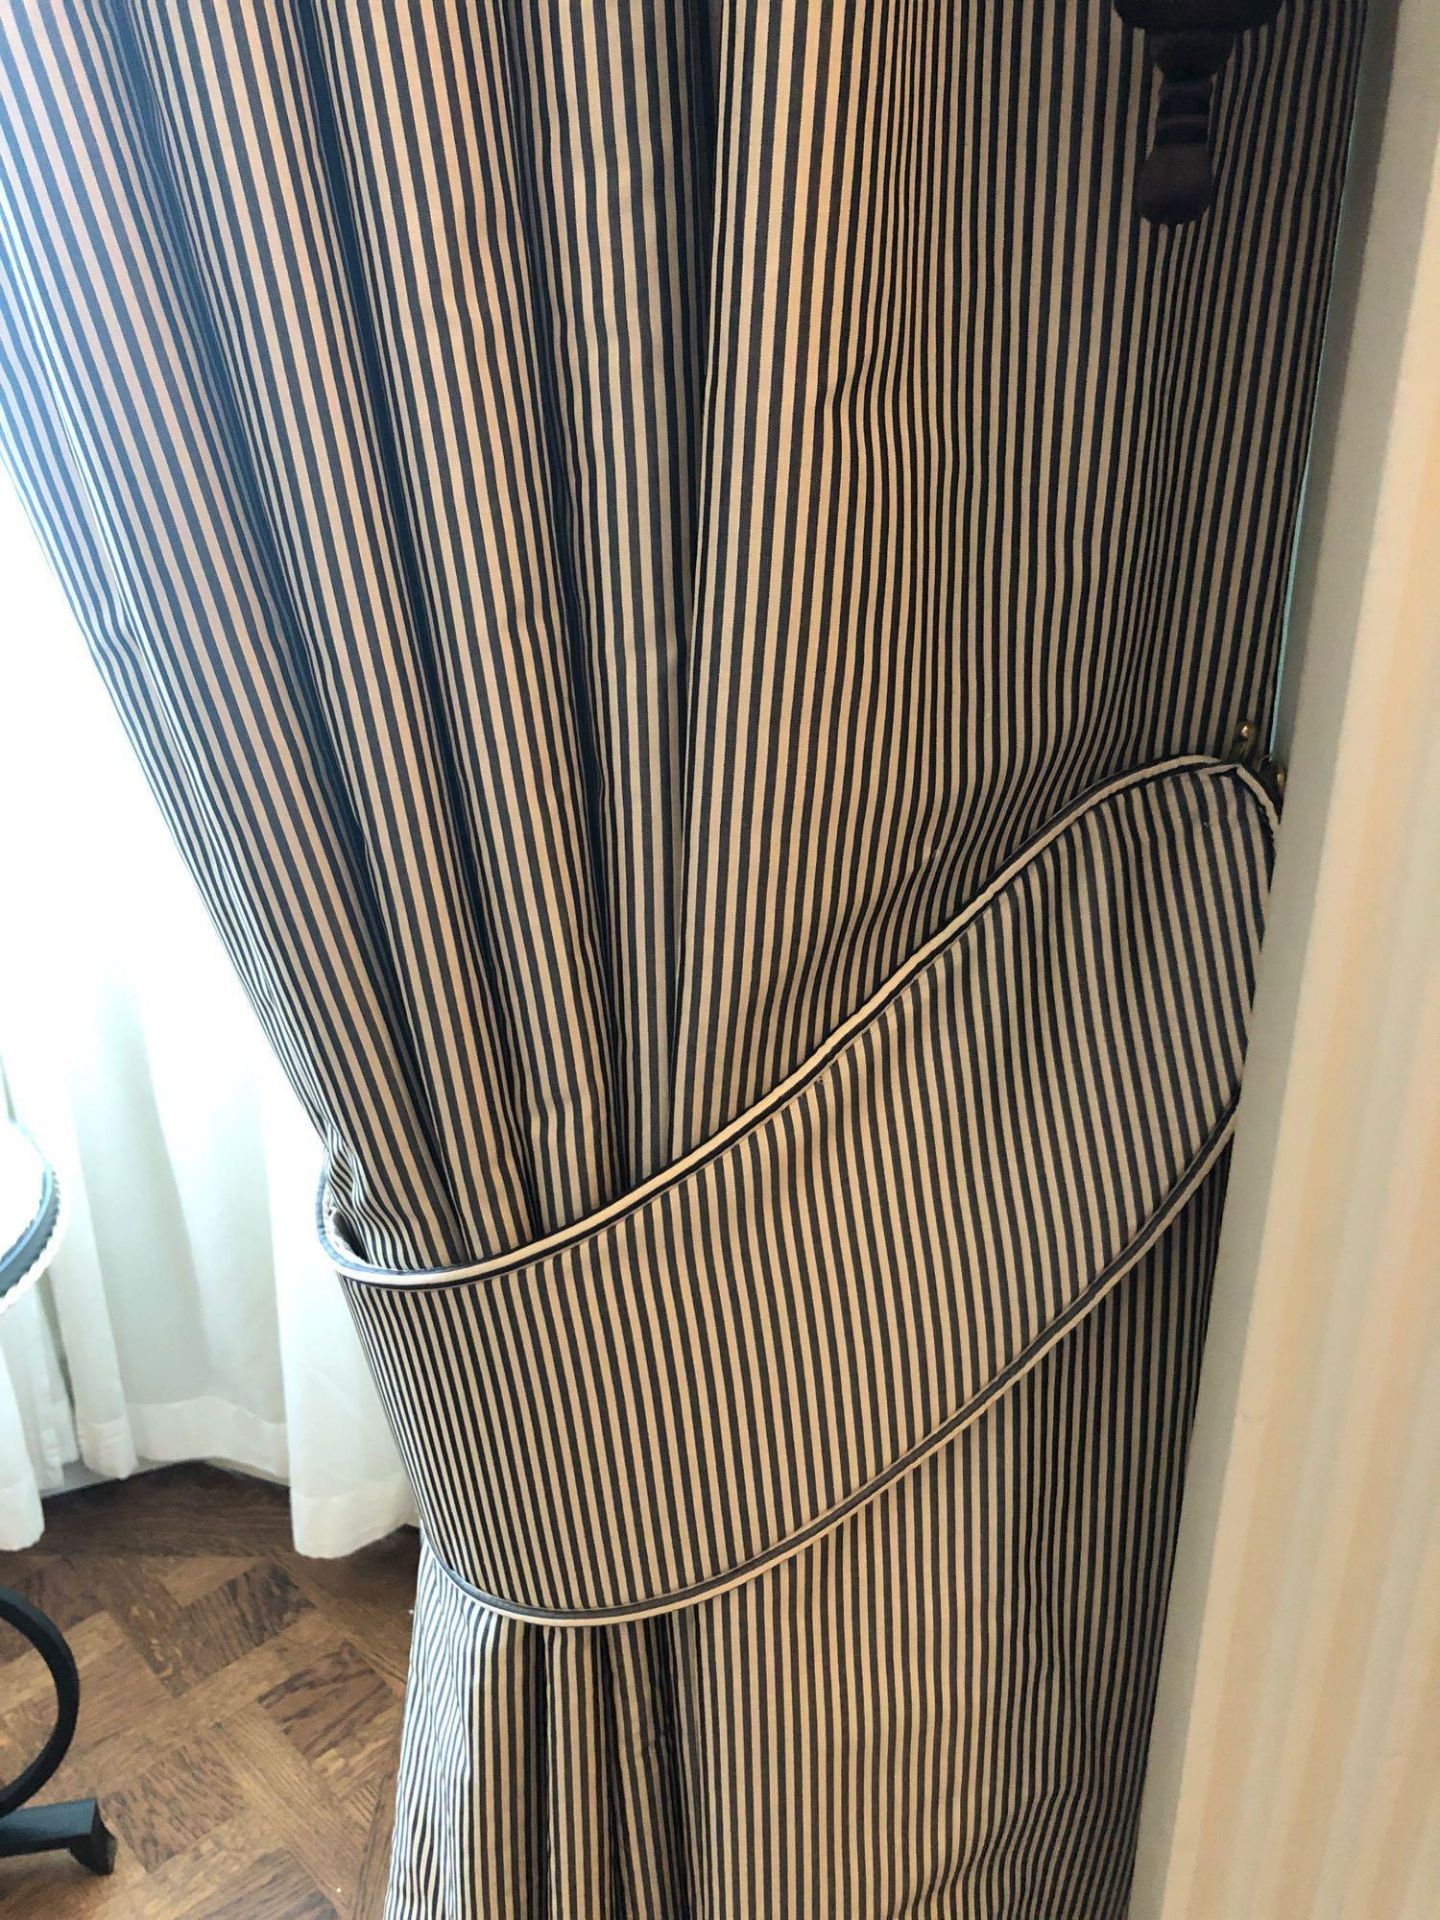 A Pair Of Drapes Fabric In Brown And White Striped Complete With Pelmet And Tassels 257 x 160cm ( - Bild 4 aus 4